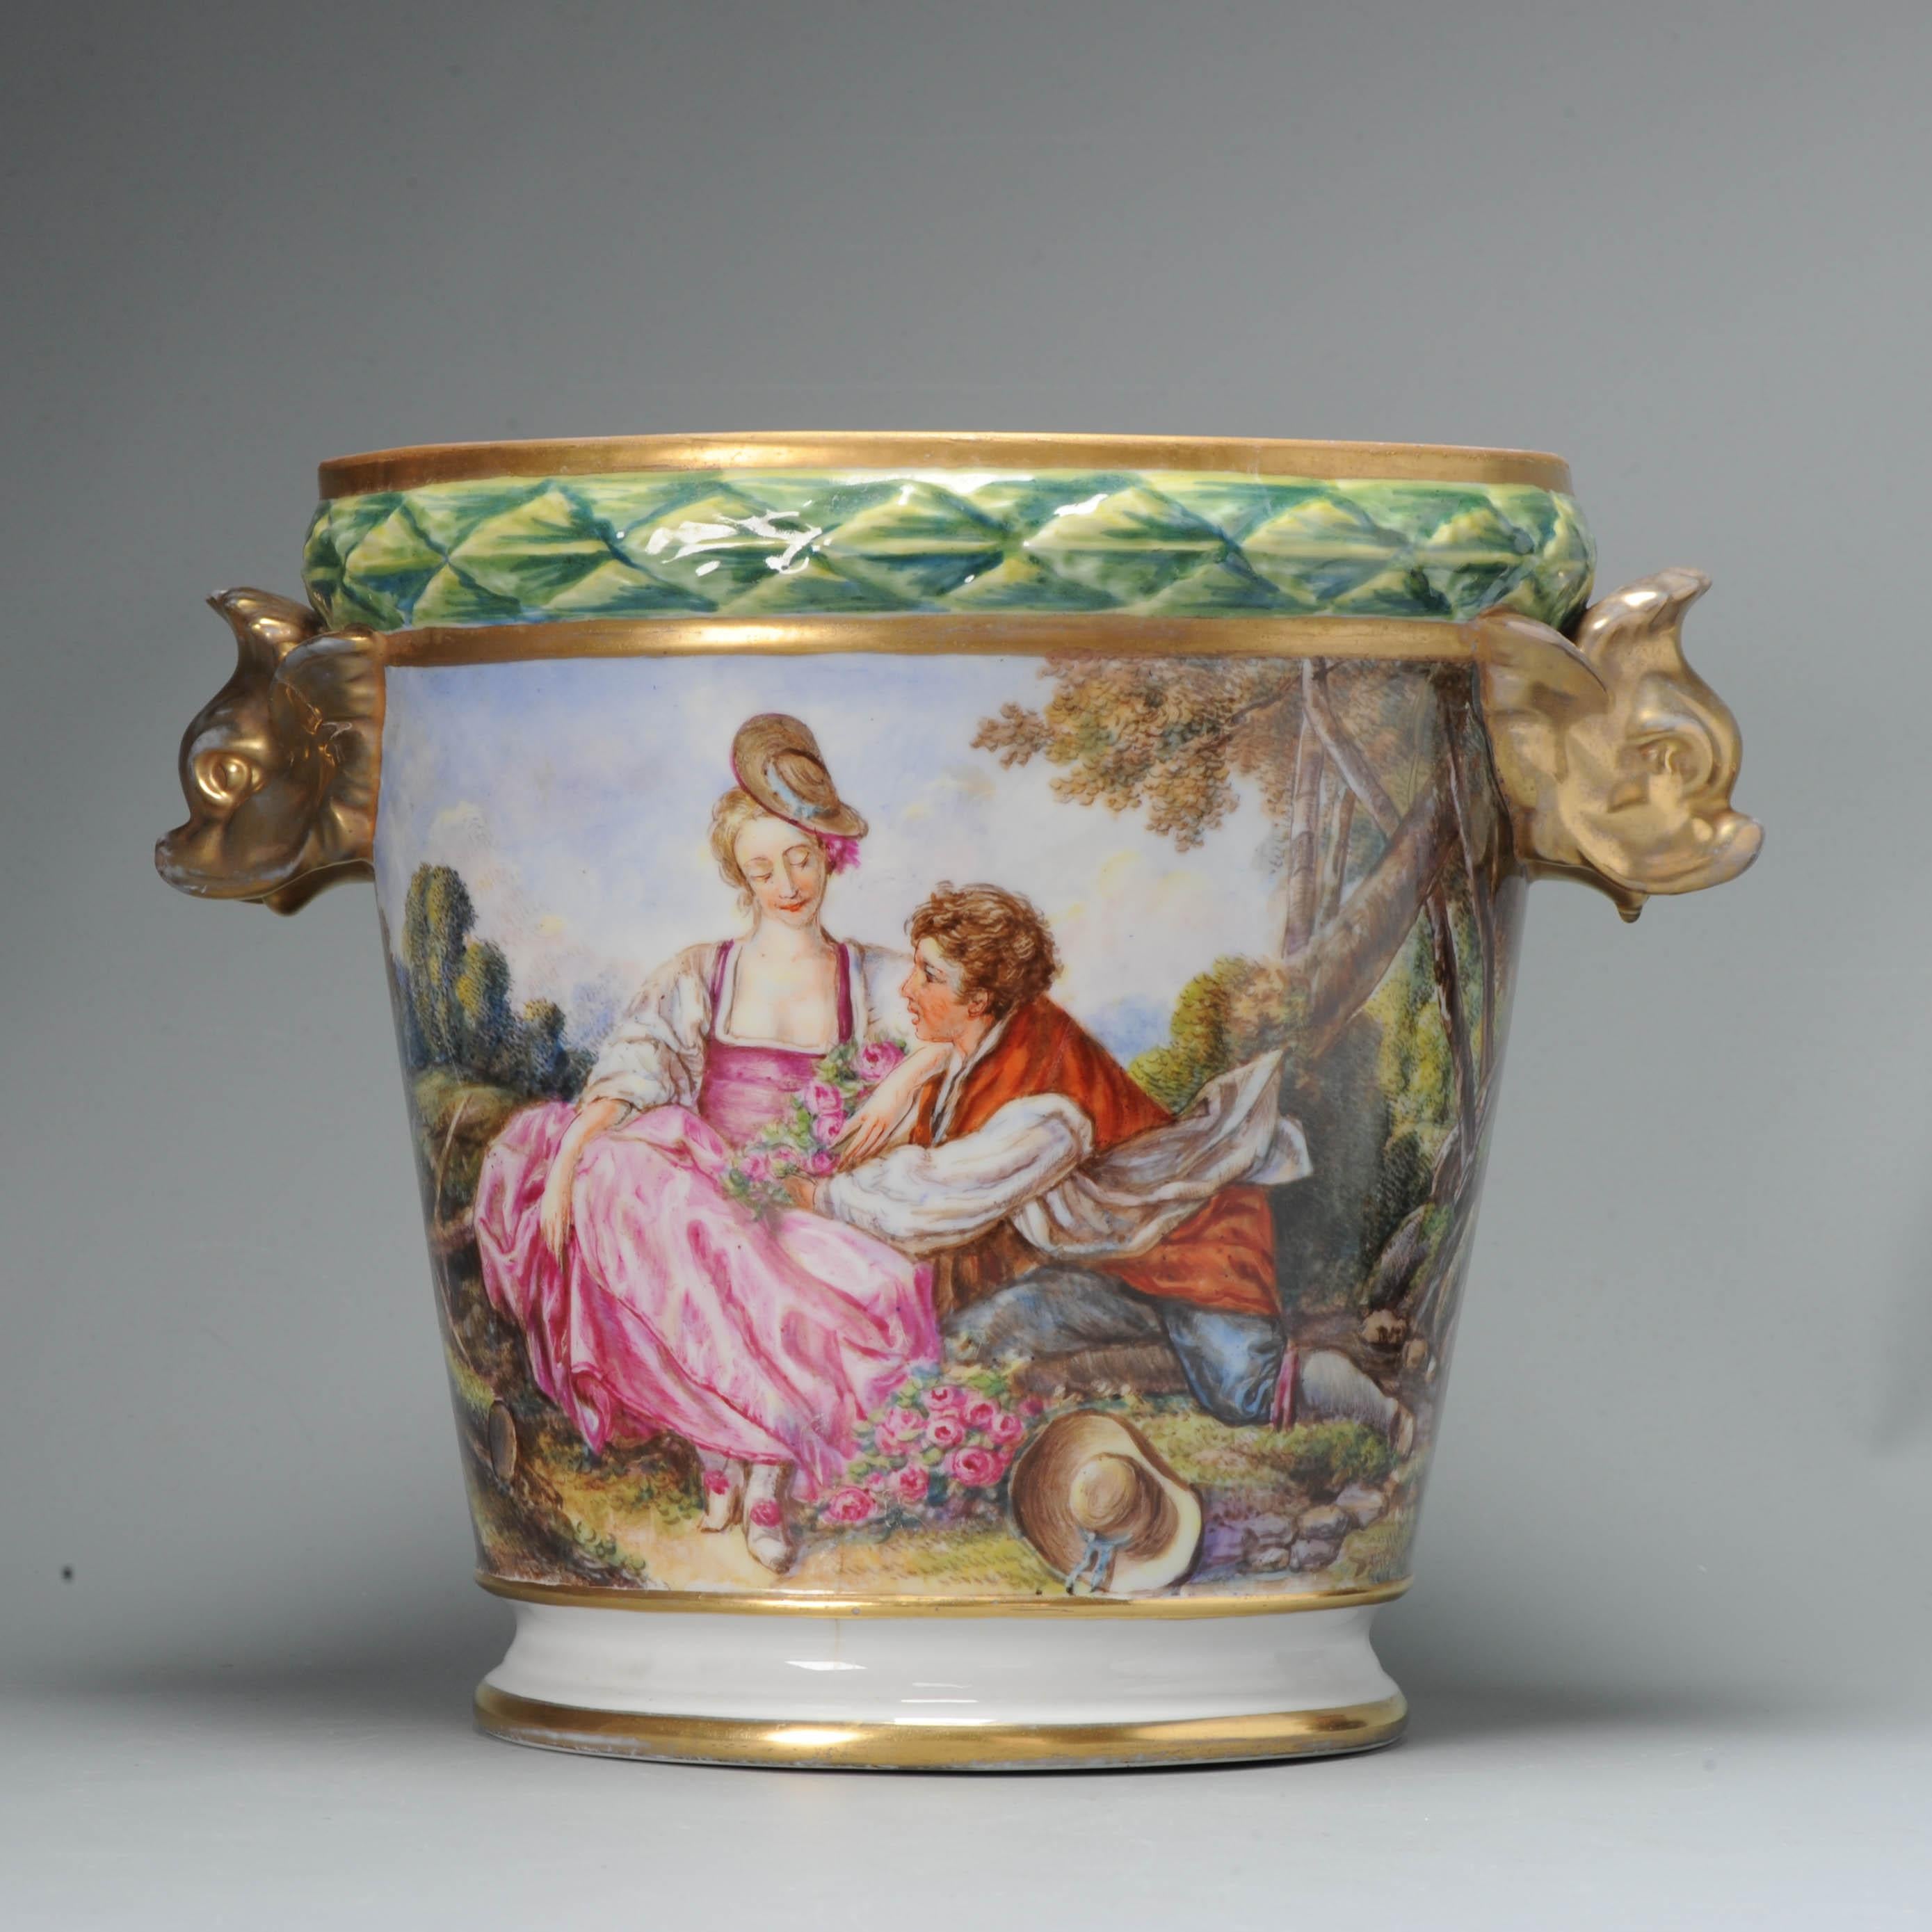 French porcelain cache pot

Condition
No real damages found, just a small process flaw in base and some ware. Size290mm x 215mm x 220mm
Period
19th century.